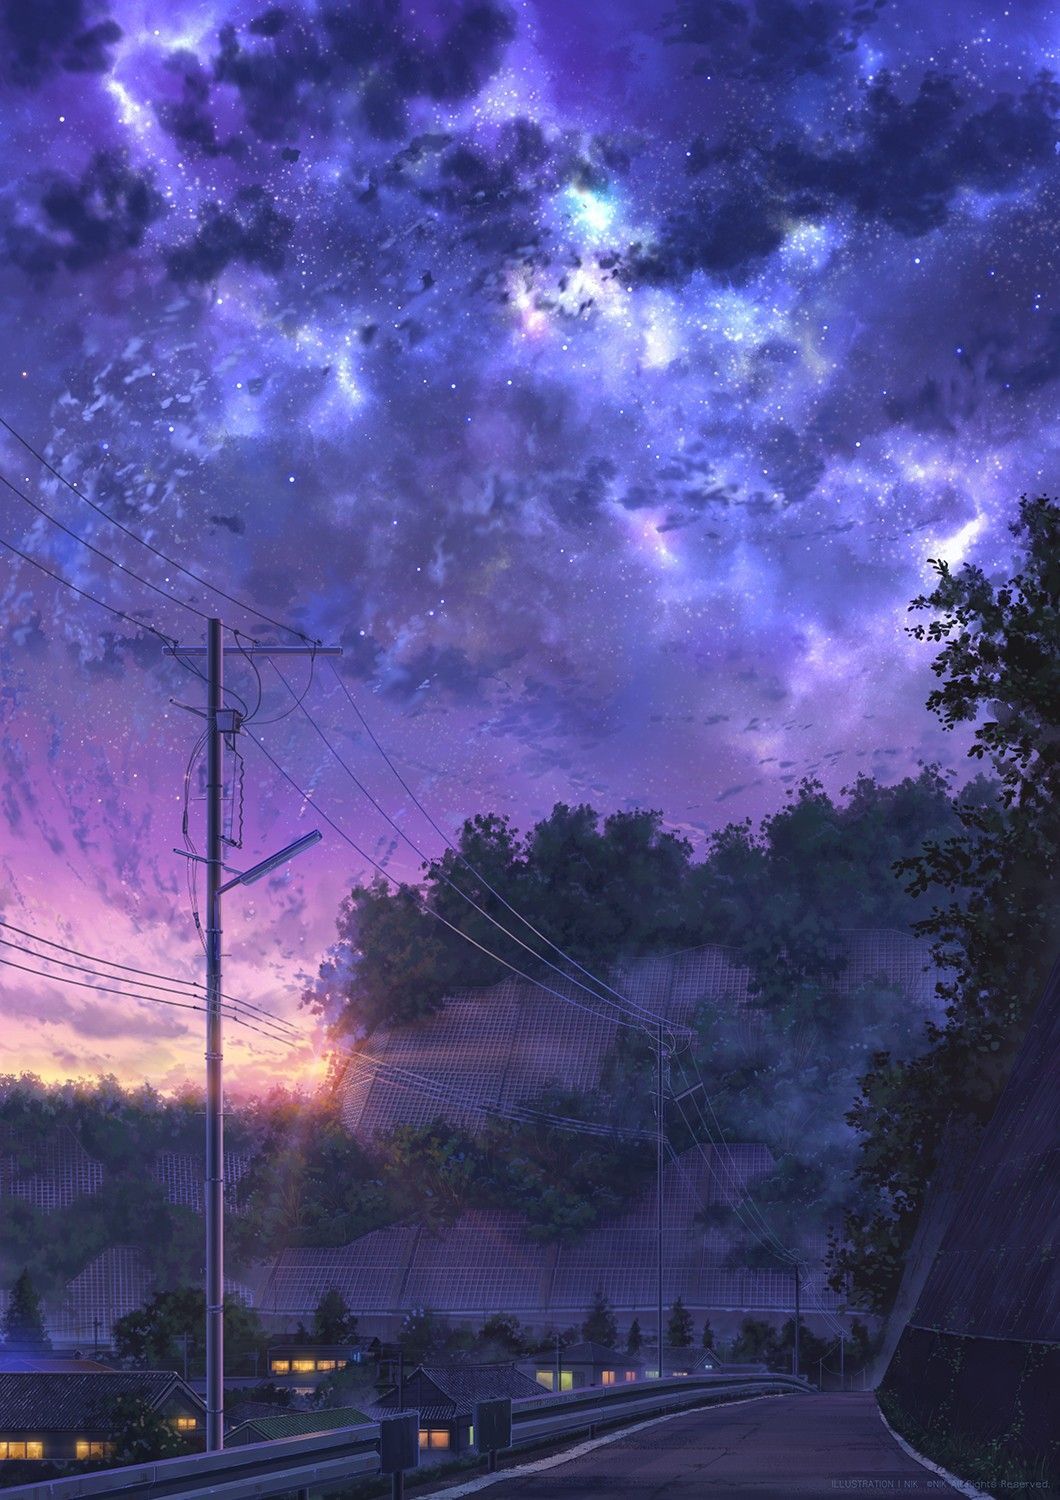 Wallpaper Anime Aesthetic Galaxy Anime Anime Art Anime Style Sleeve  Background  Download Free Image